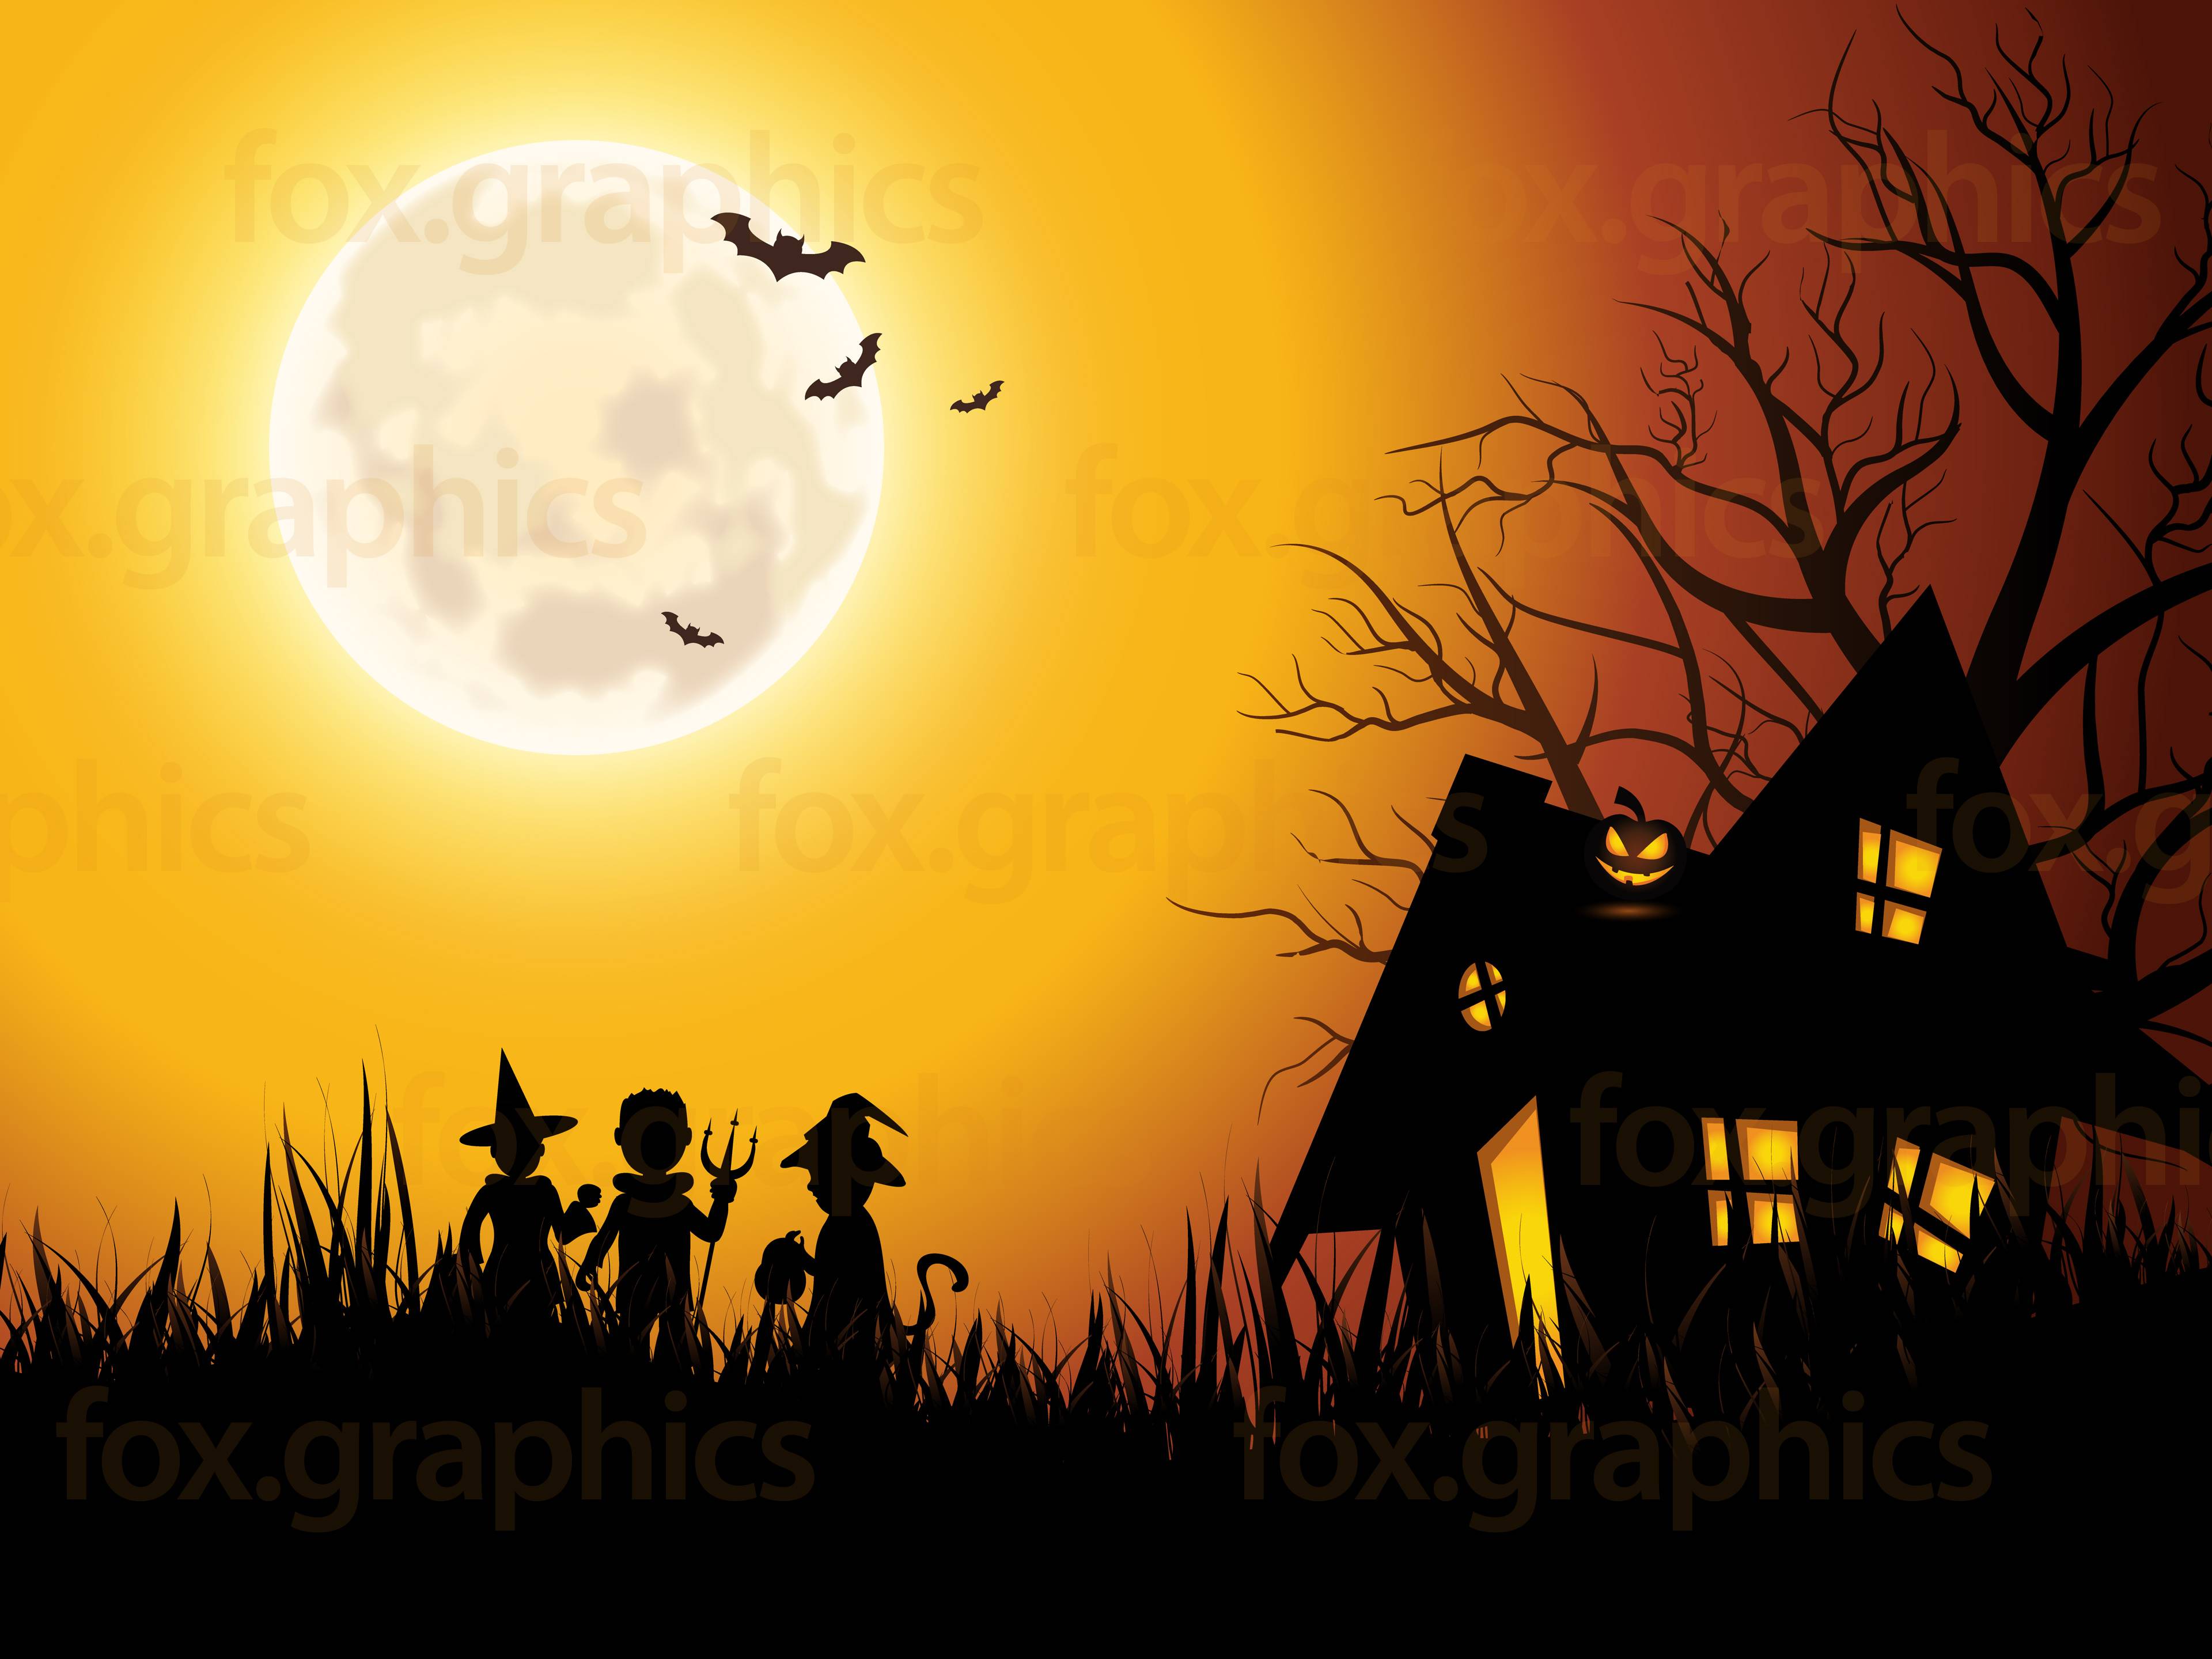 Spooky house background - Fox Graphics